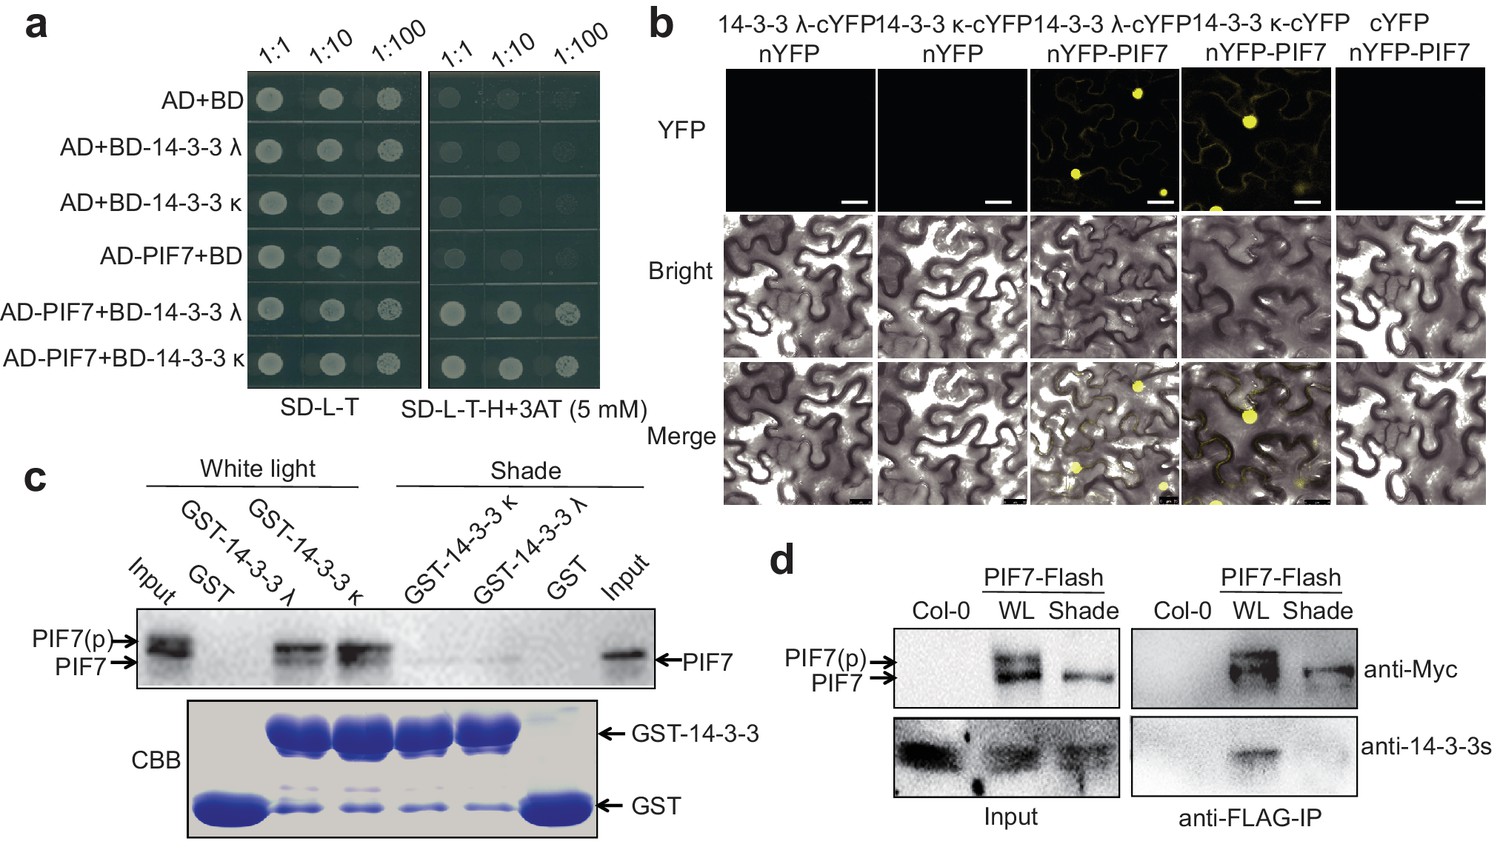 Shade-induced nuclear localization of PIF7 is regulated by 